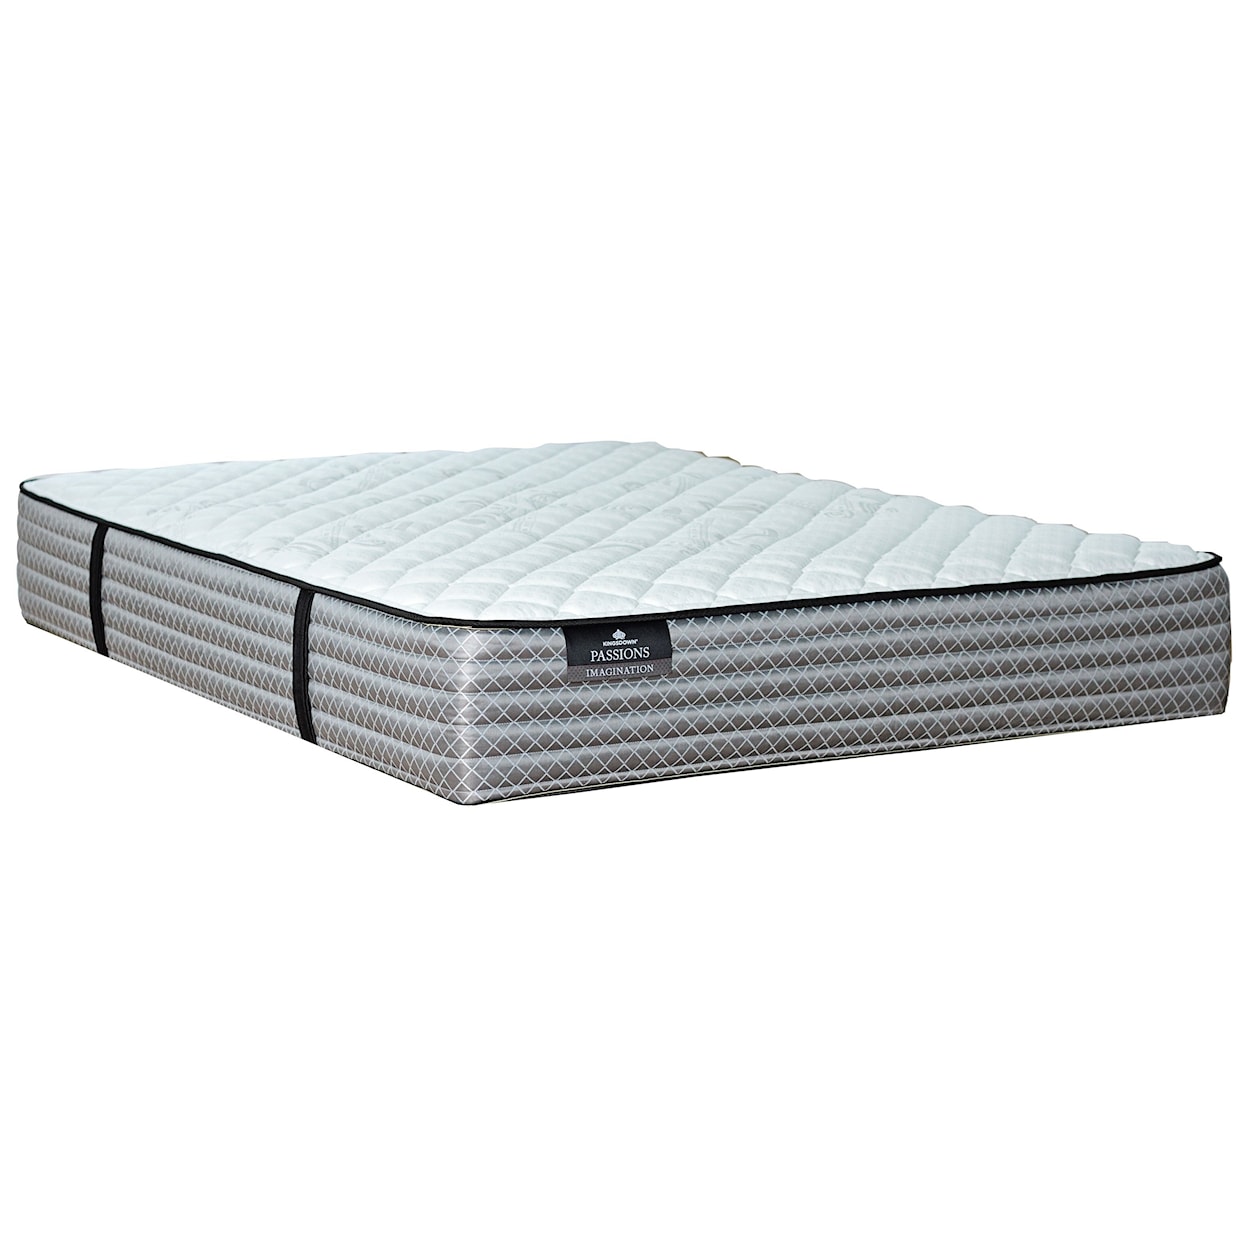 Kingsdown Passions Imagination Firm King Firm Pocketed Coil Mattress